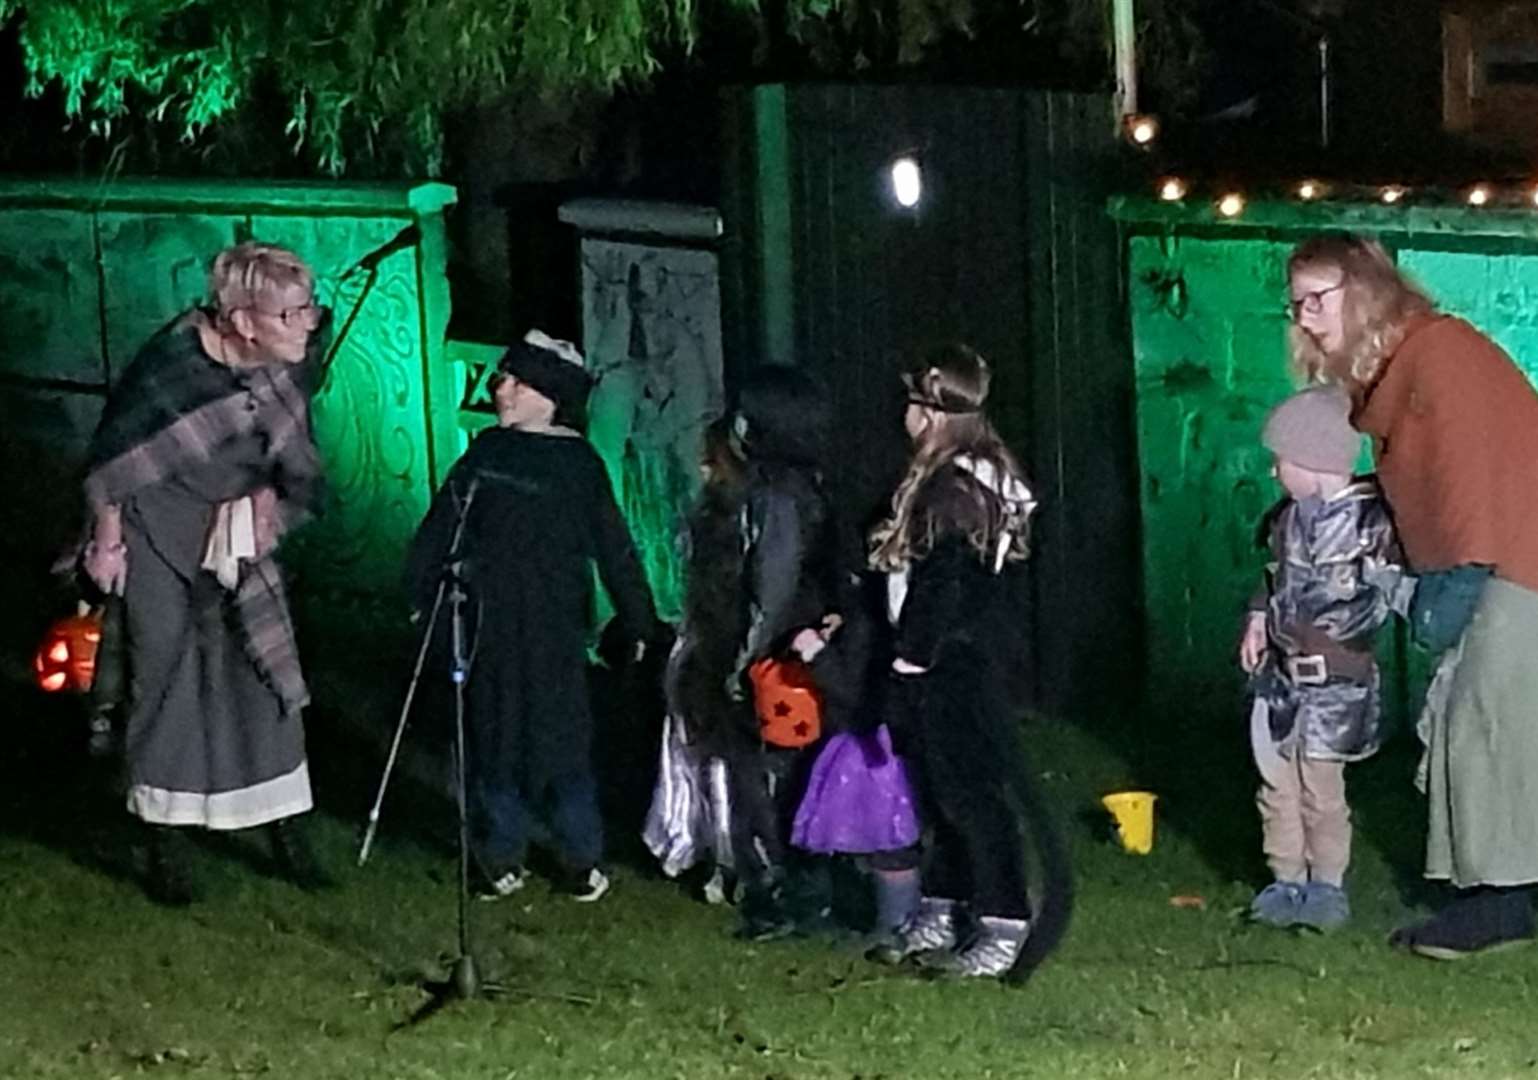 Samhain celebrations brought all ages together in Auldearn.